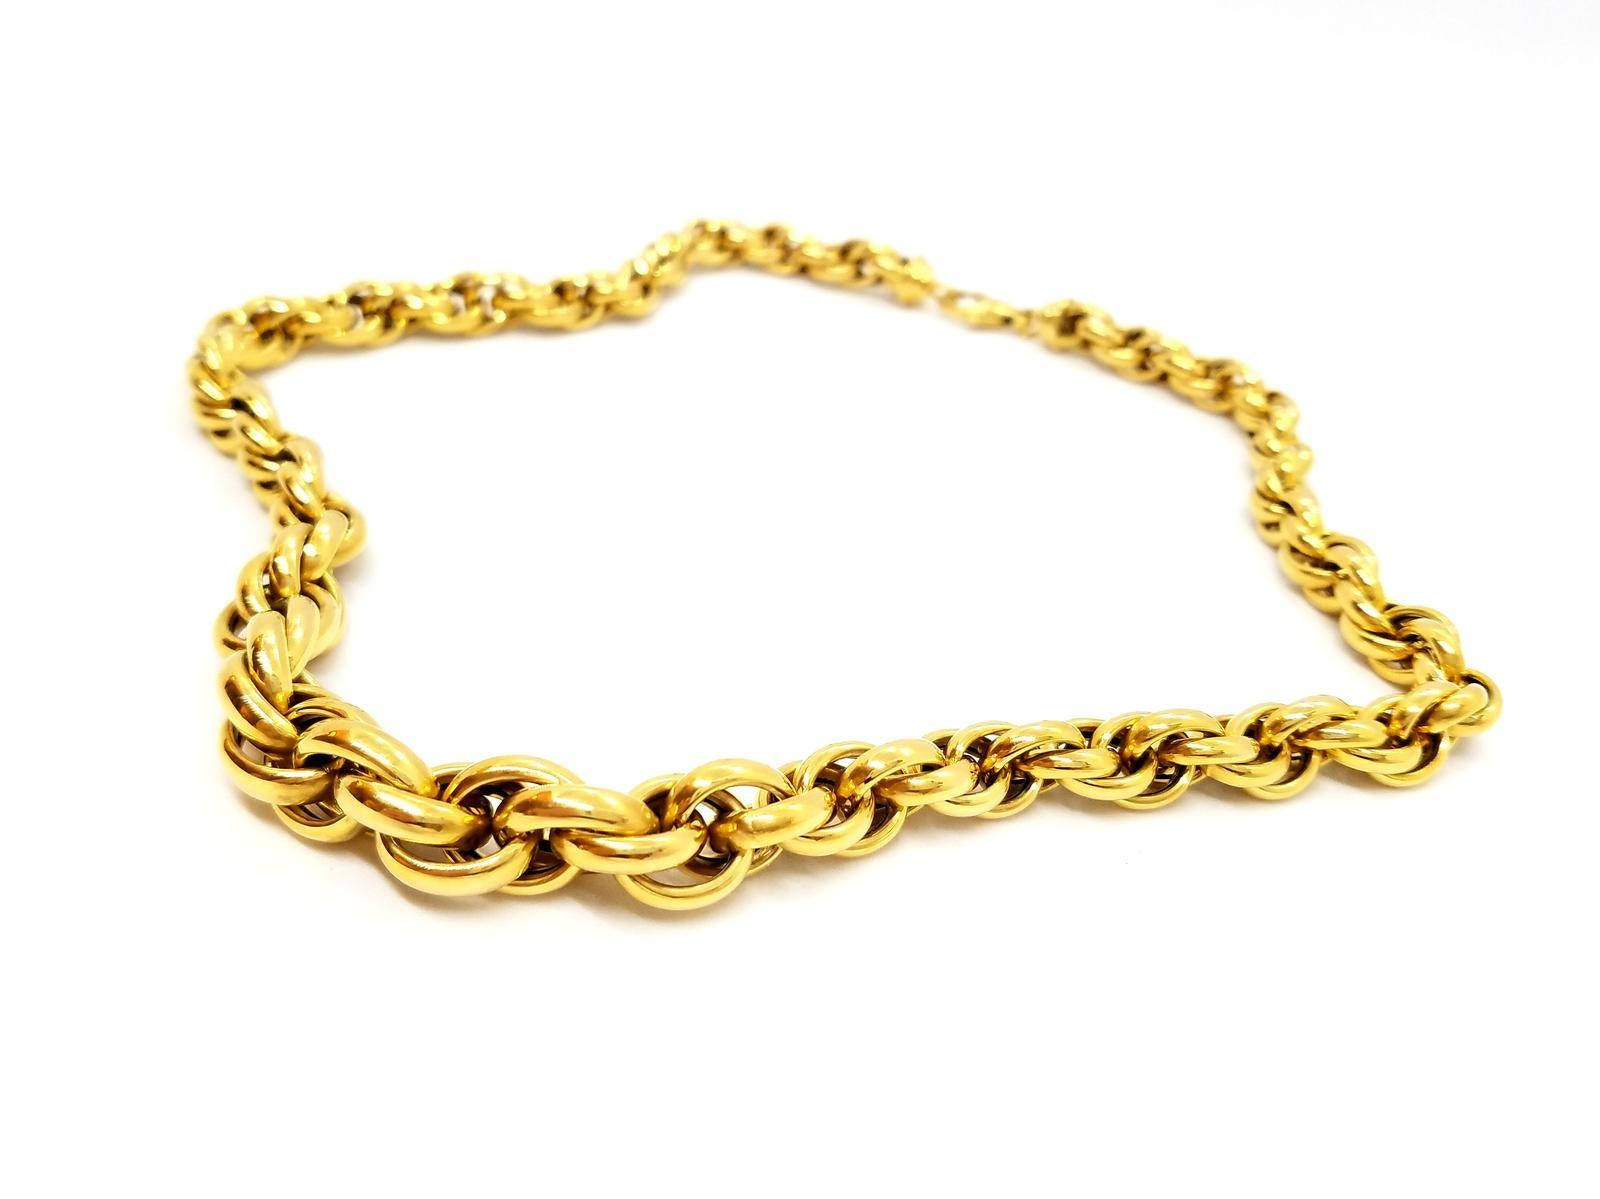 Gold necklace yellow 750 mils (18 carats). falling mesh. length: 42 cm. width at the front: 1.03 cm. rear width: 0.73 cm. total weight: 27.92 g. punch eagle's head. excellent condition
